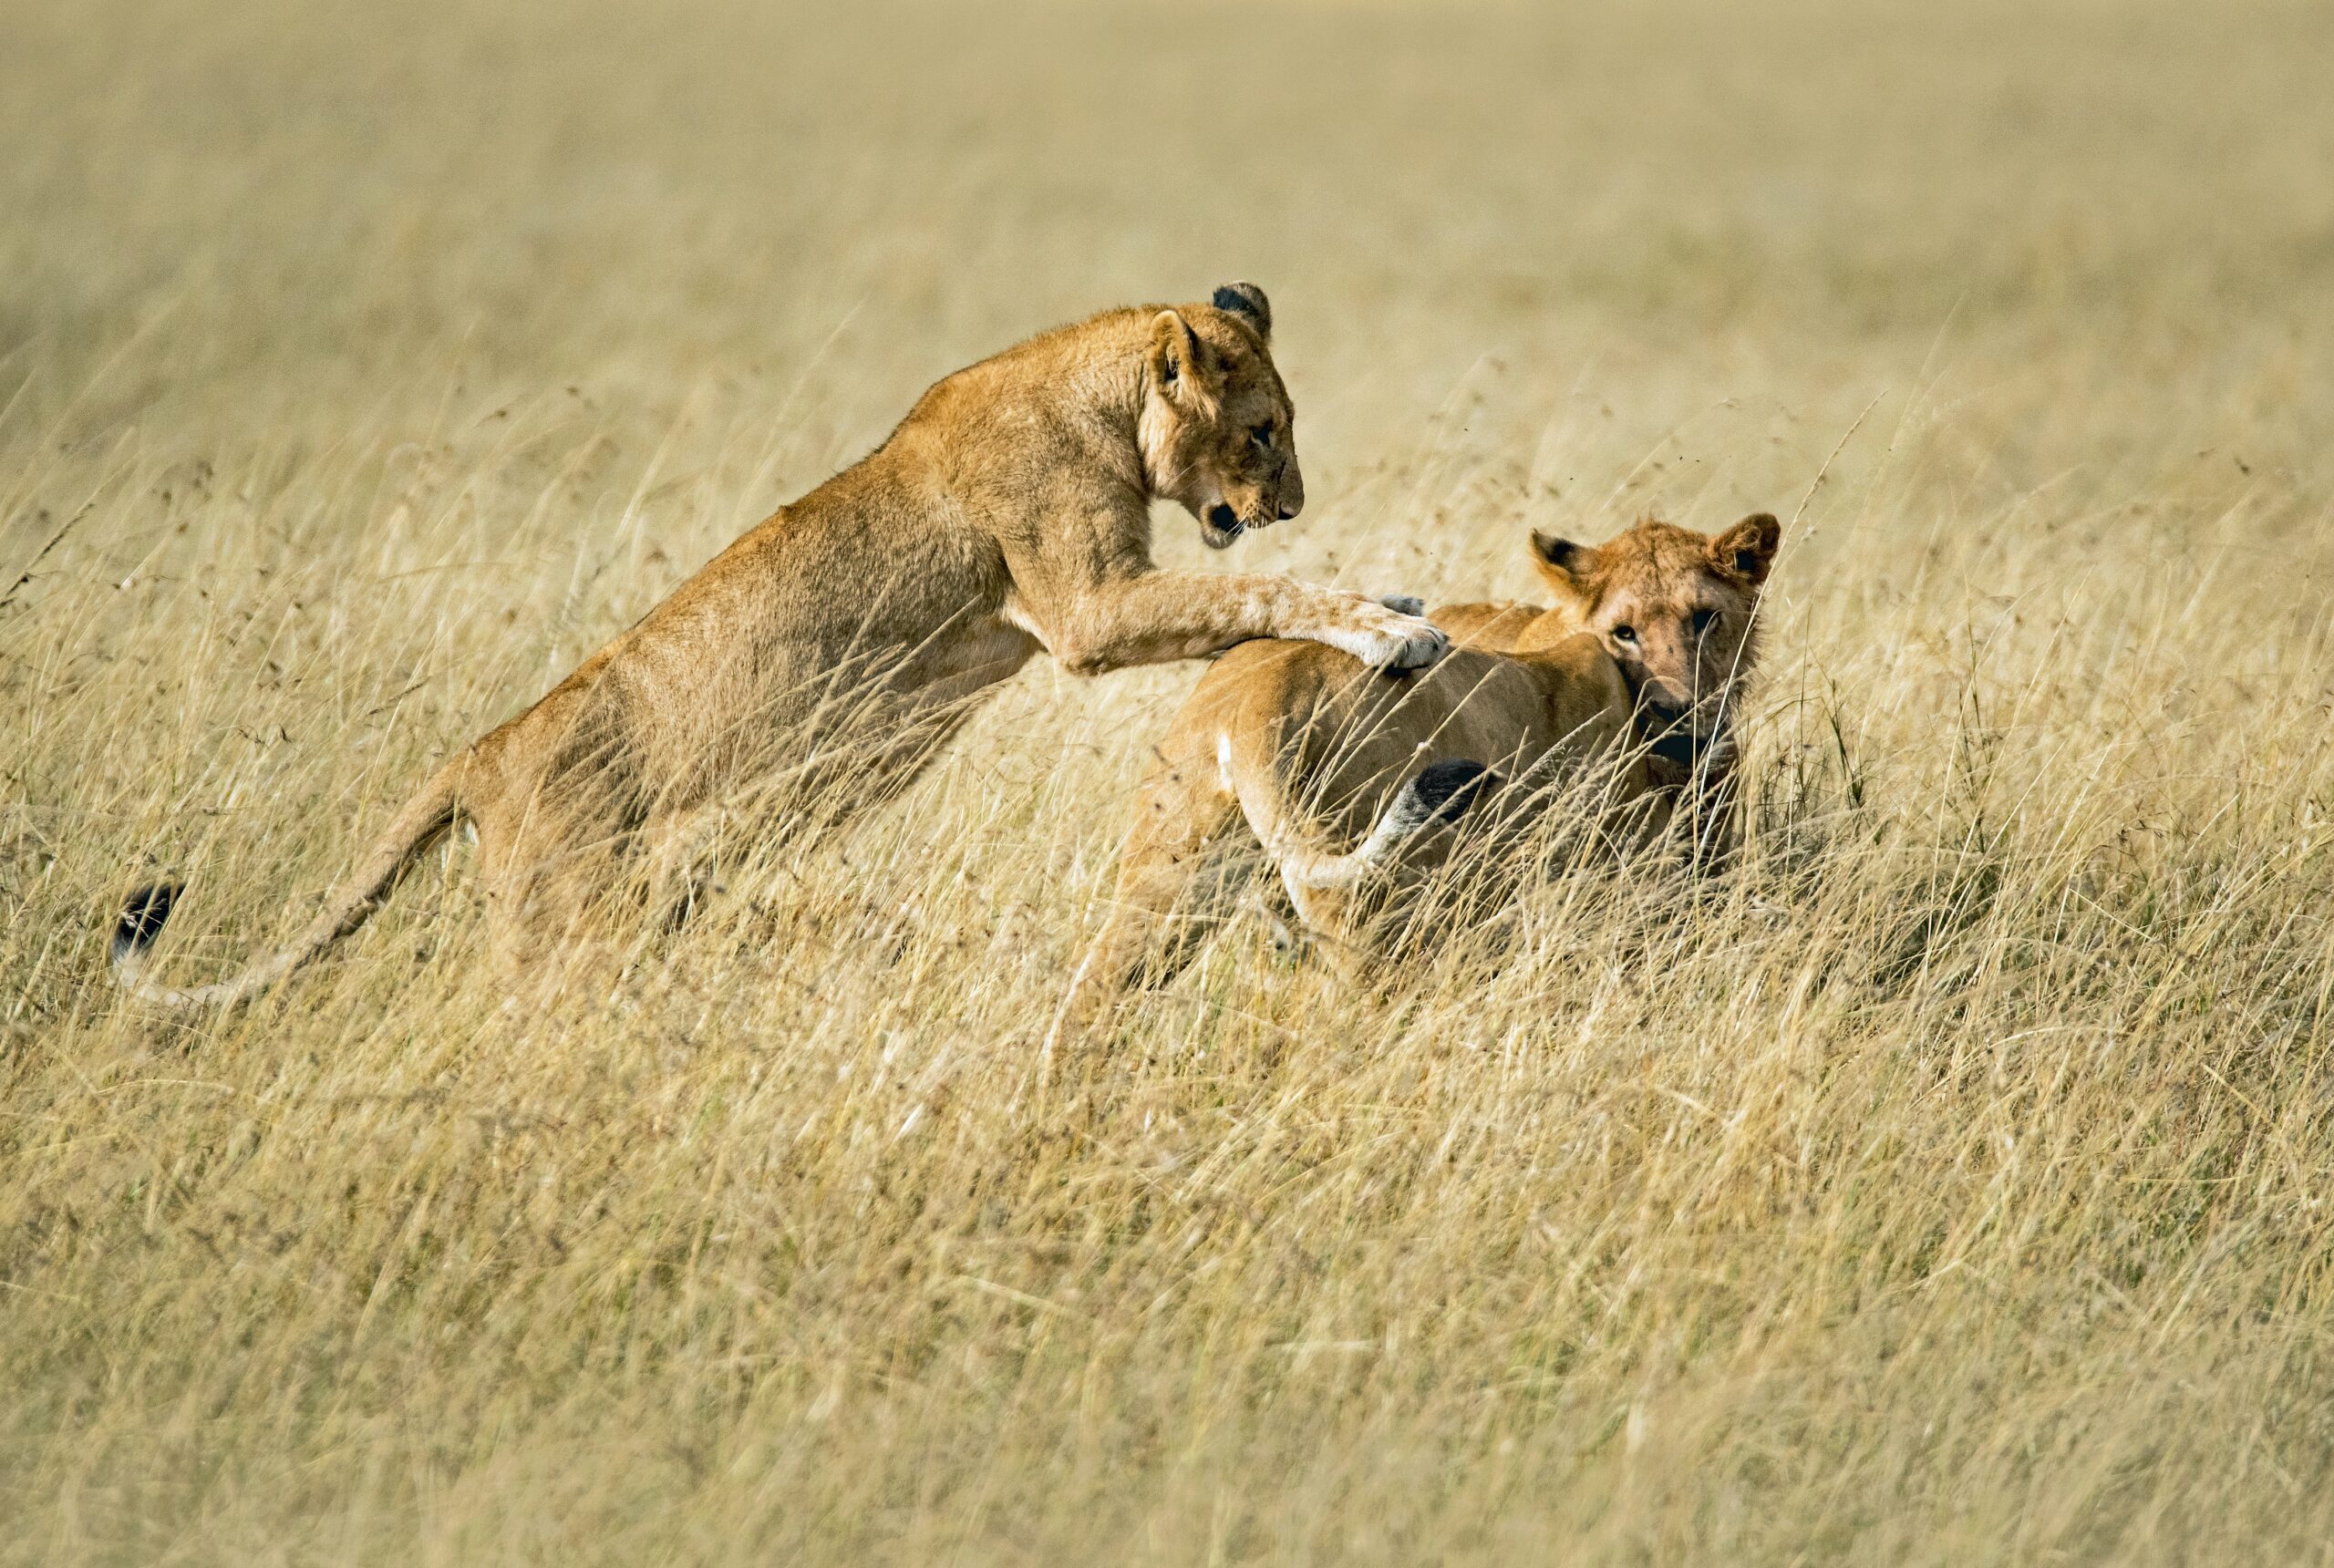 Lionesses in Serengeti national park-Mado Tours Africa